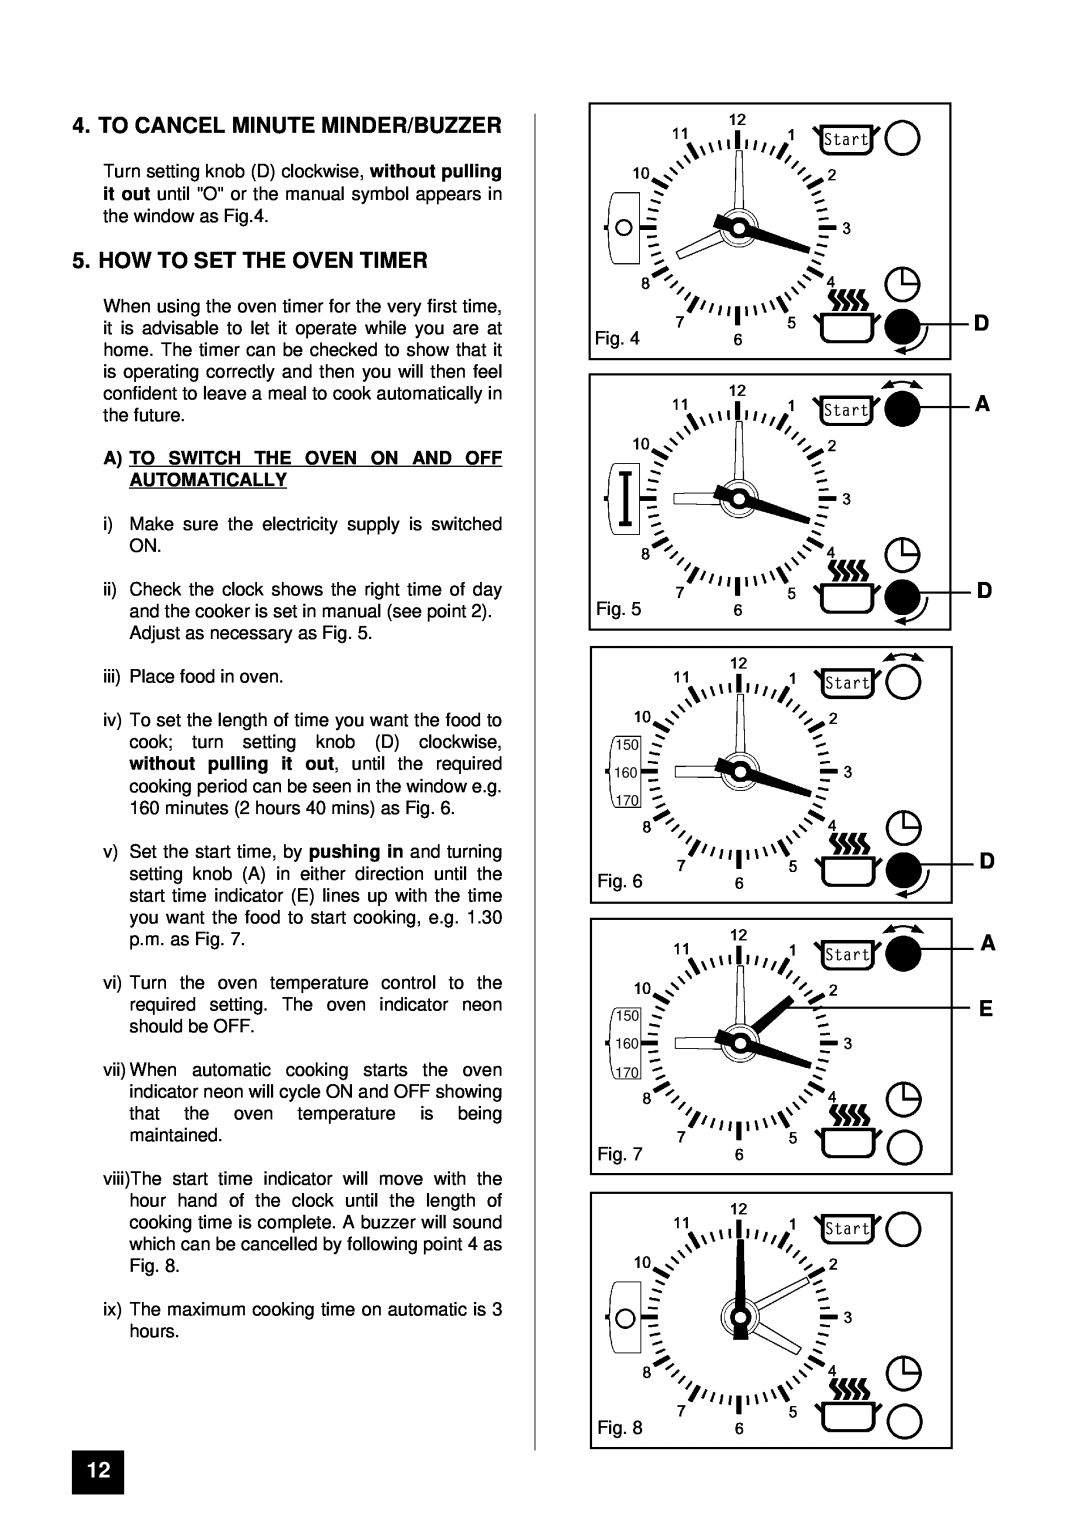 Tricity Bendix CSI 2400 installation instructions To Cancel Minute Minder/Buzzer, How To Set The Oven Timer, D A D D A E 